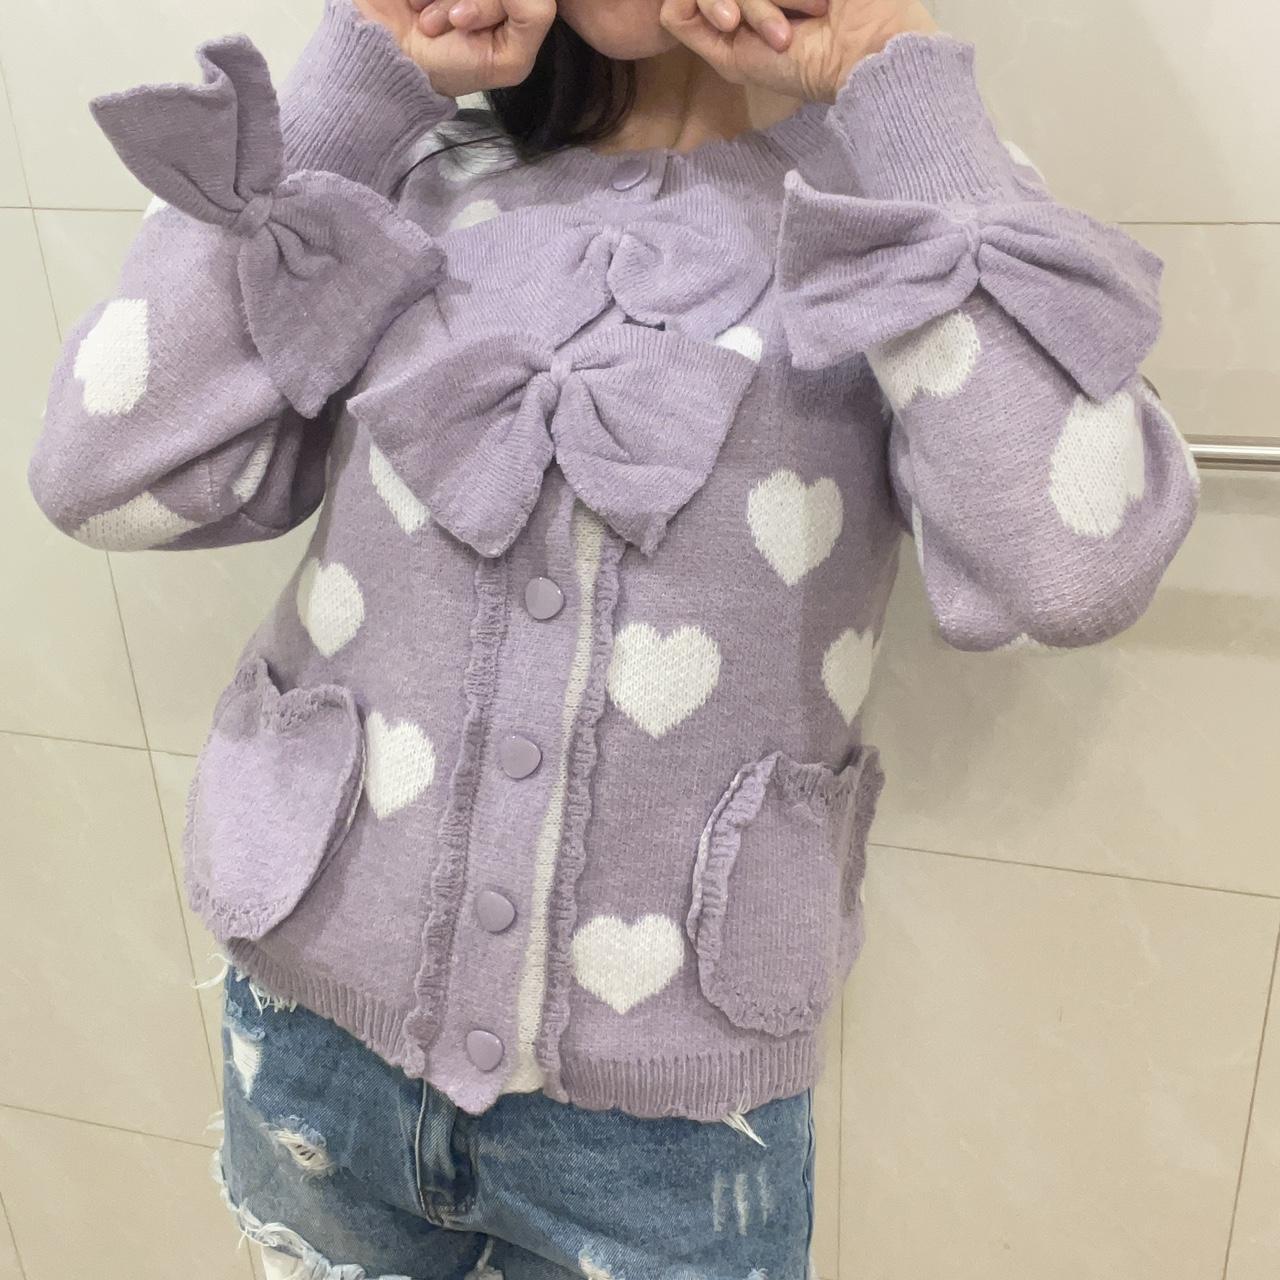 Purple Bow and White Heart Cardigan 💜 Brand... - Depop